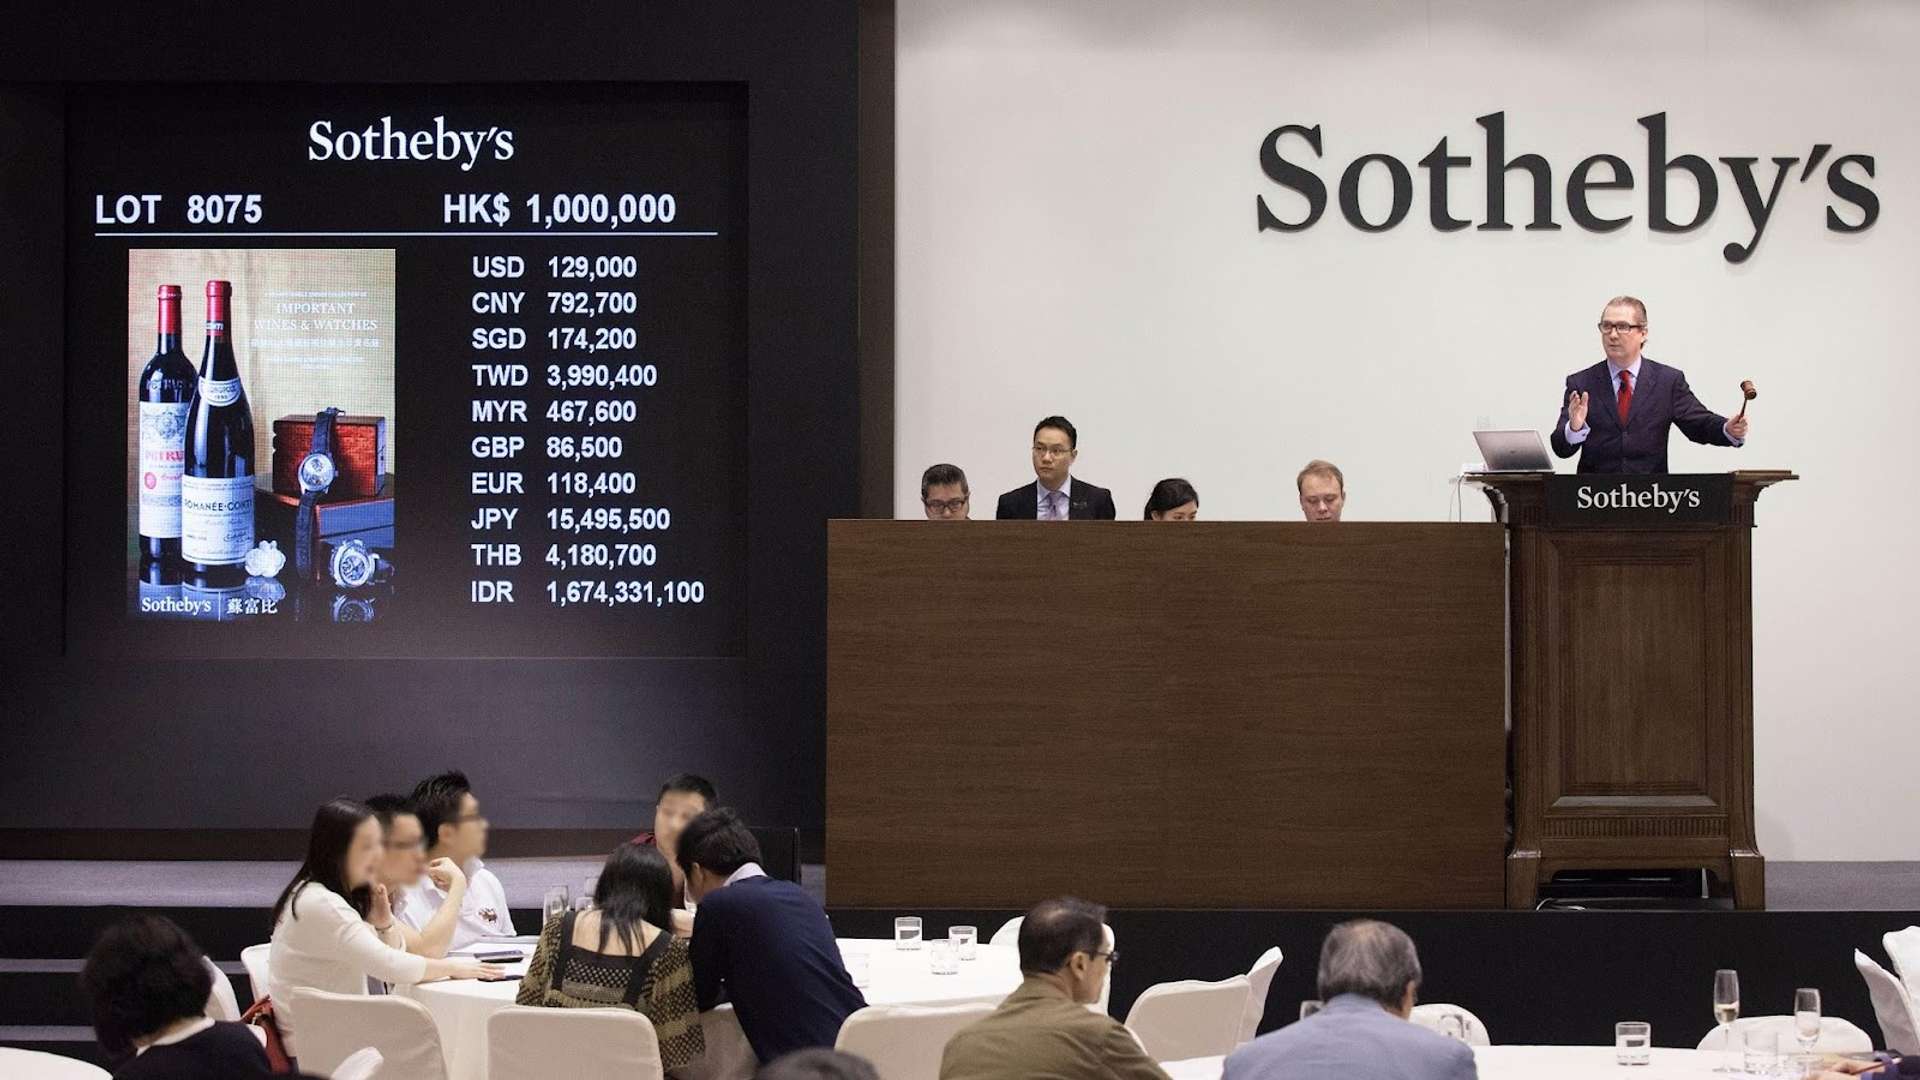 Sotheby's auction room with the auctioneer standing with his gavel to the right of the image and the left of the image displaying a digital screen with the current wine lot being auctioned